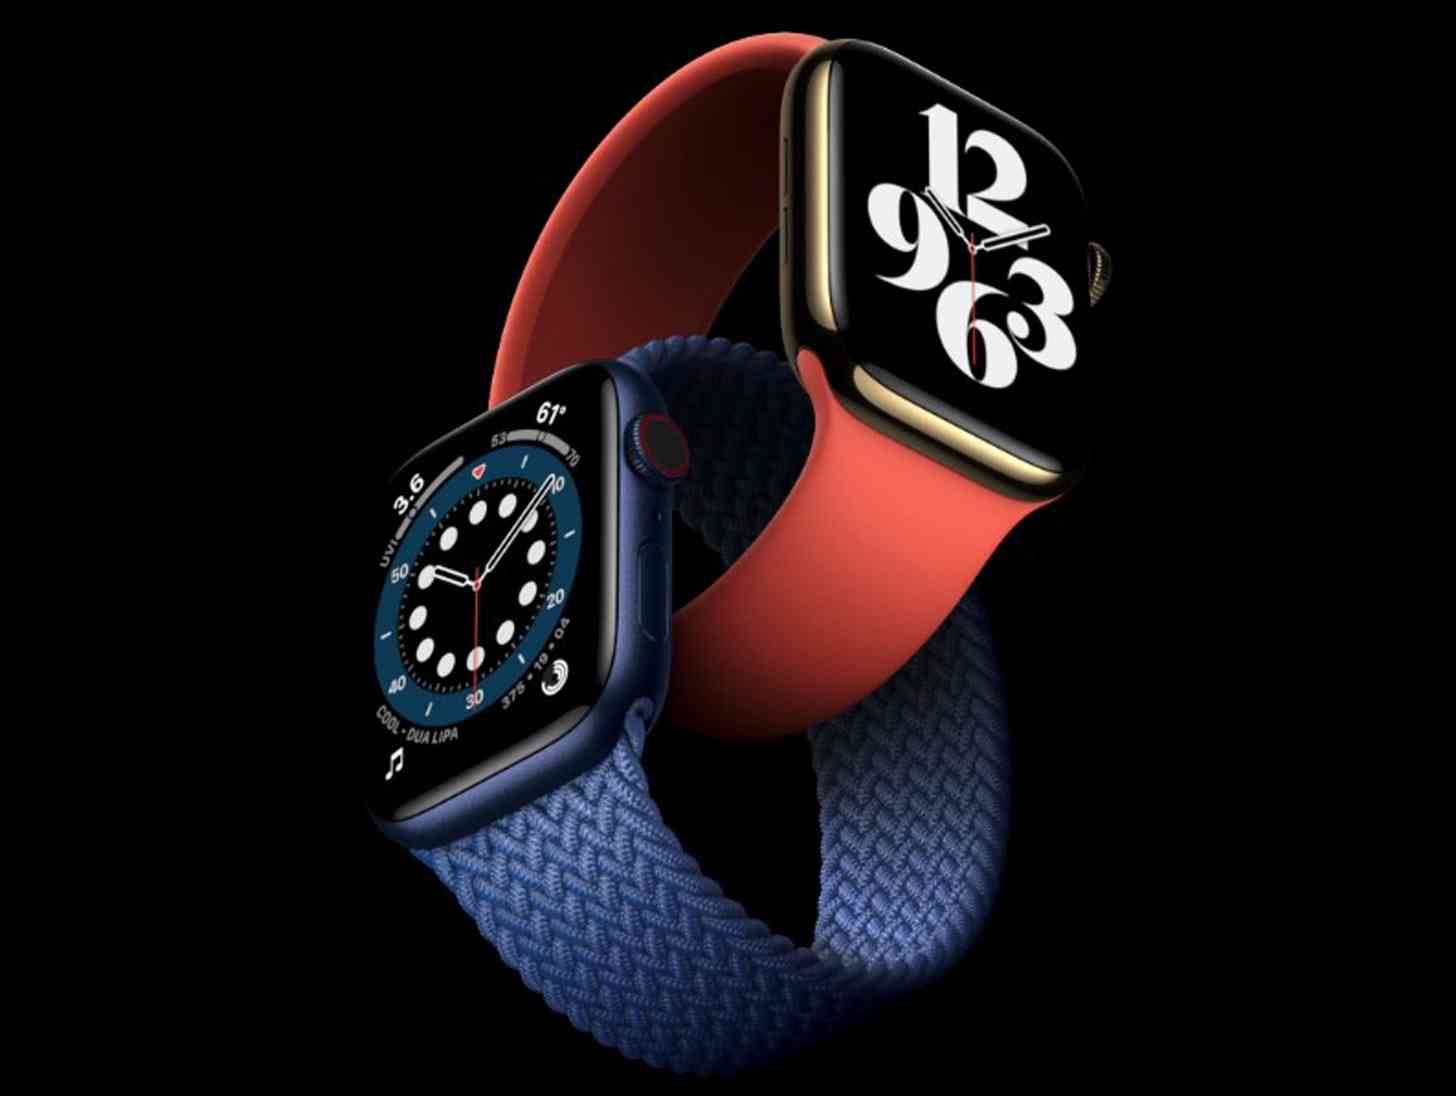 Apple Watch Series 6 official with new color options, blood oxygen tracking | News.Wirefly